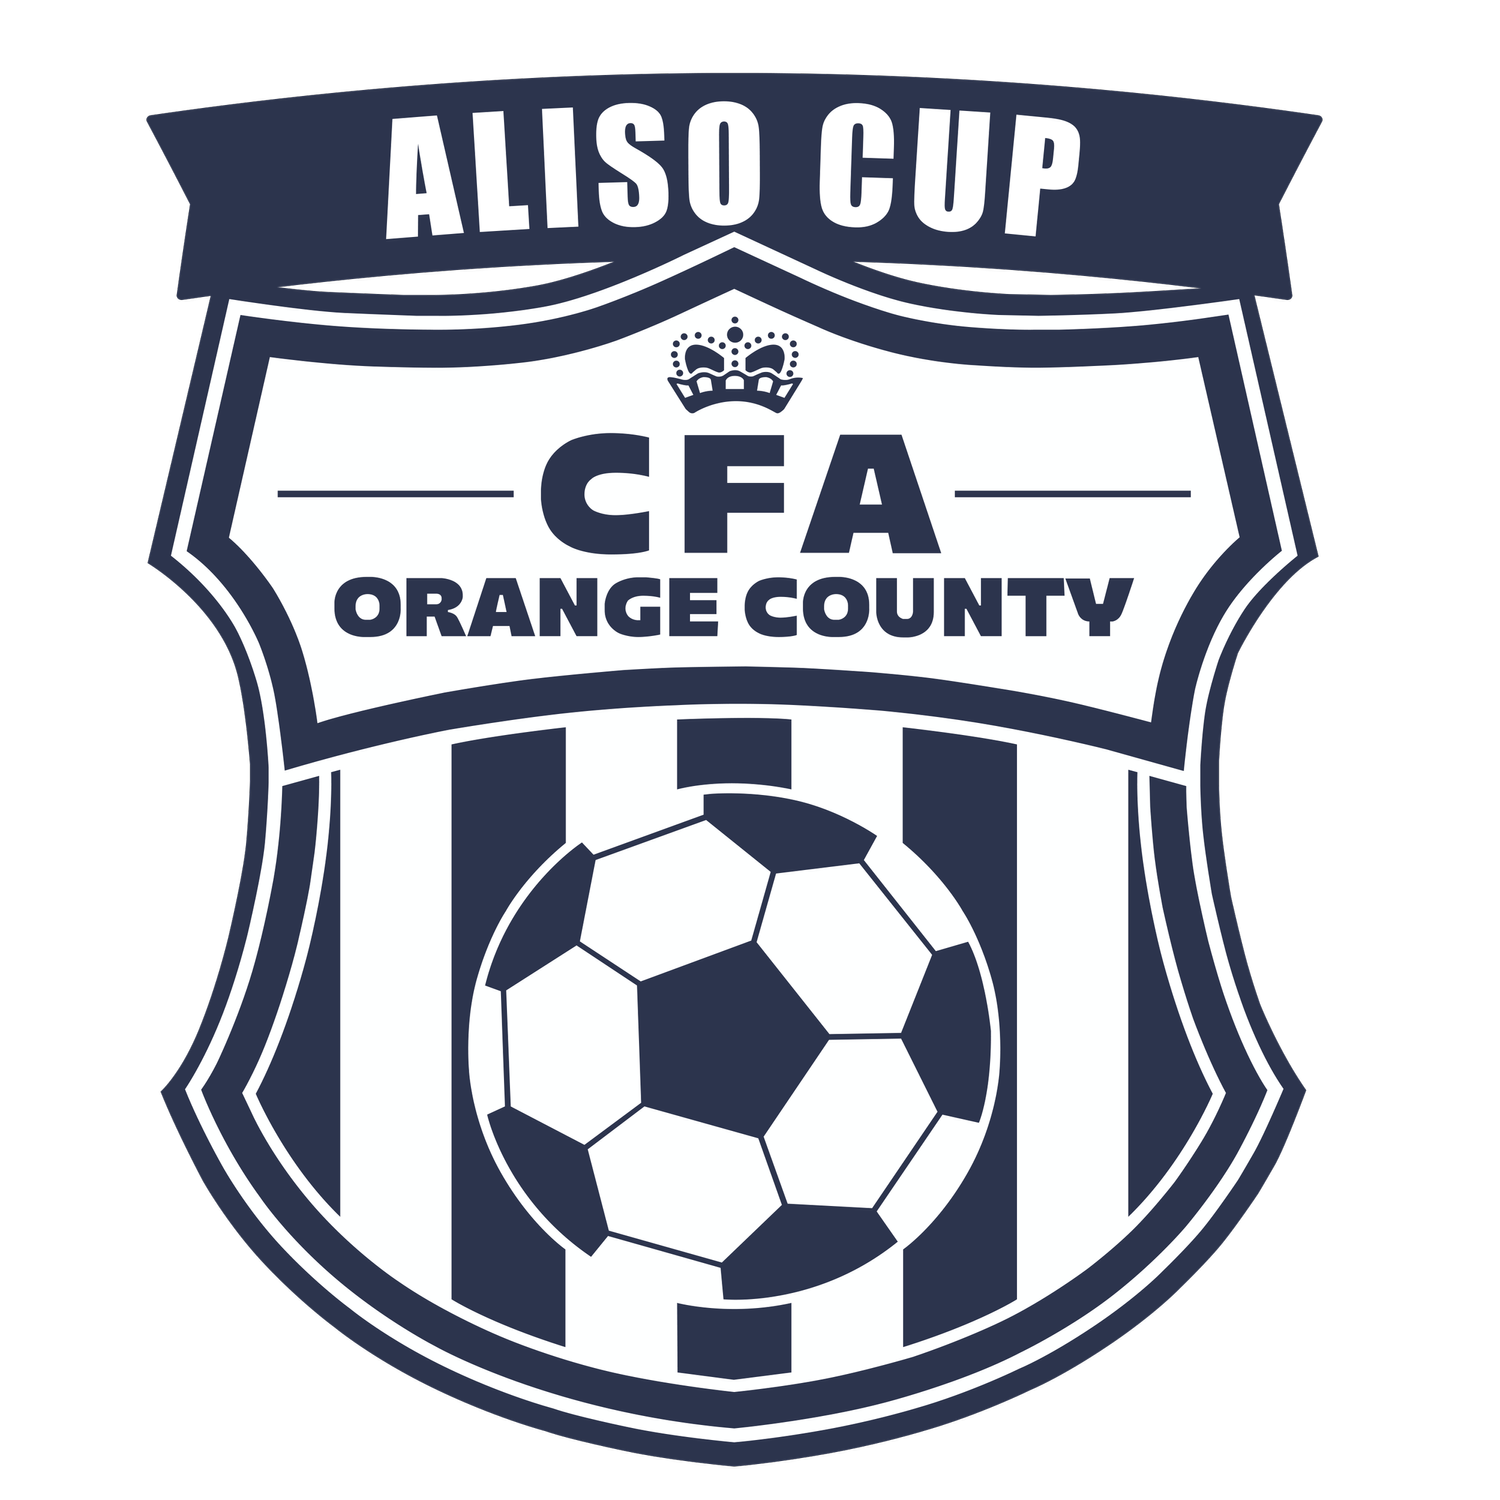 Aliso Cup